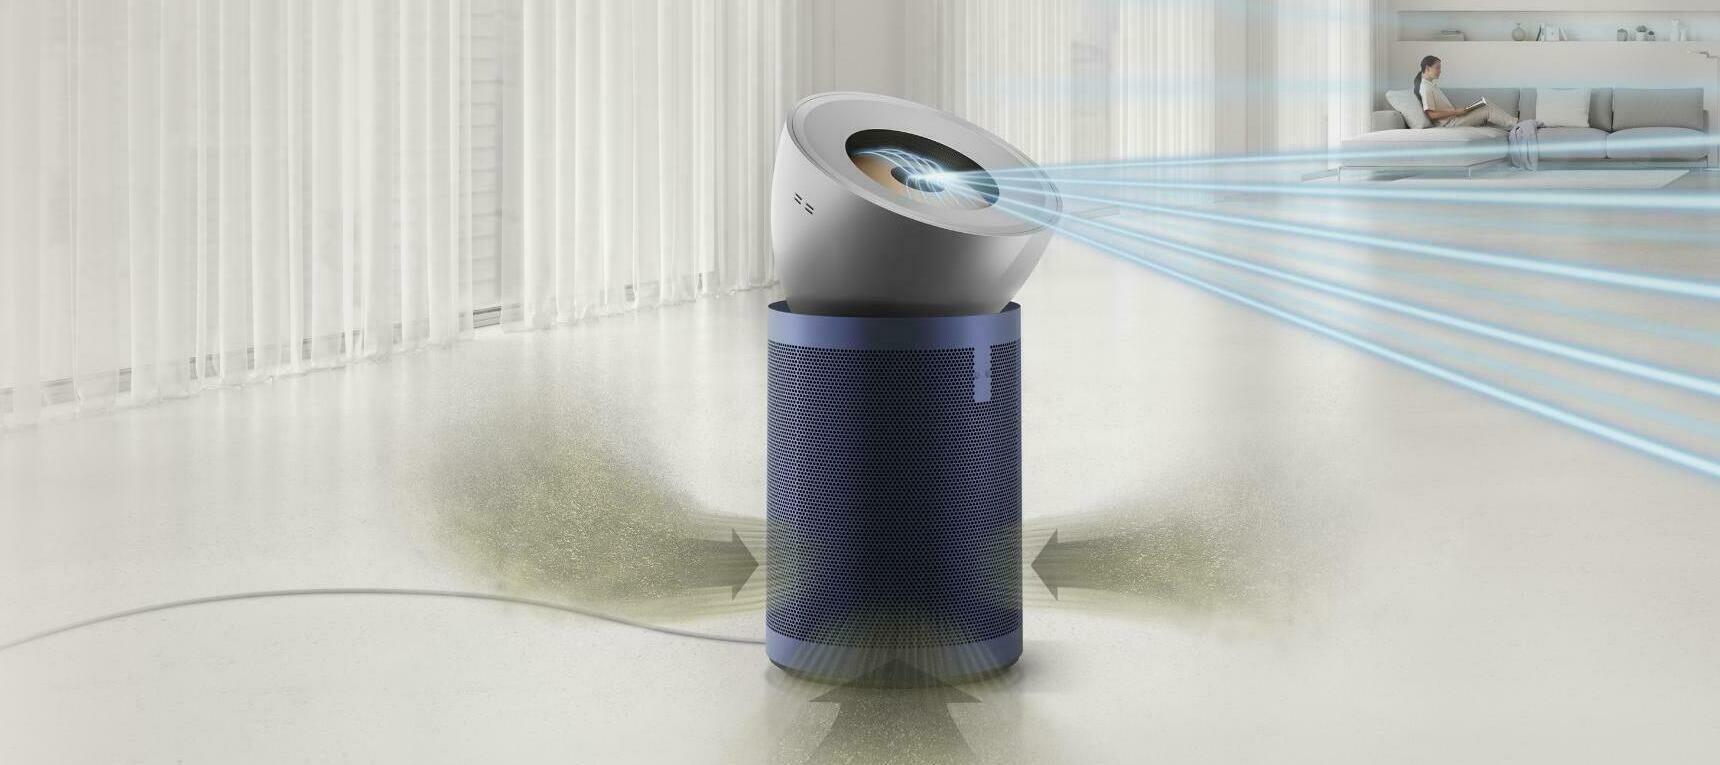 Dyson's three things to look for when choosing an air purifier